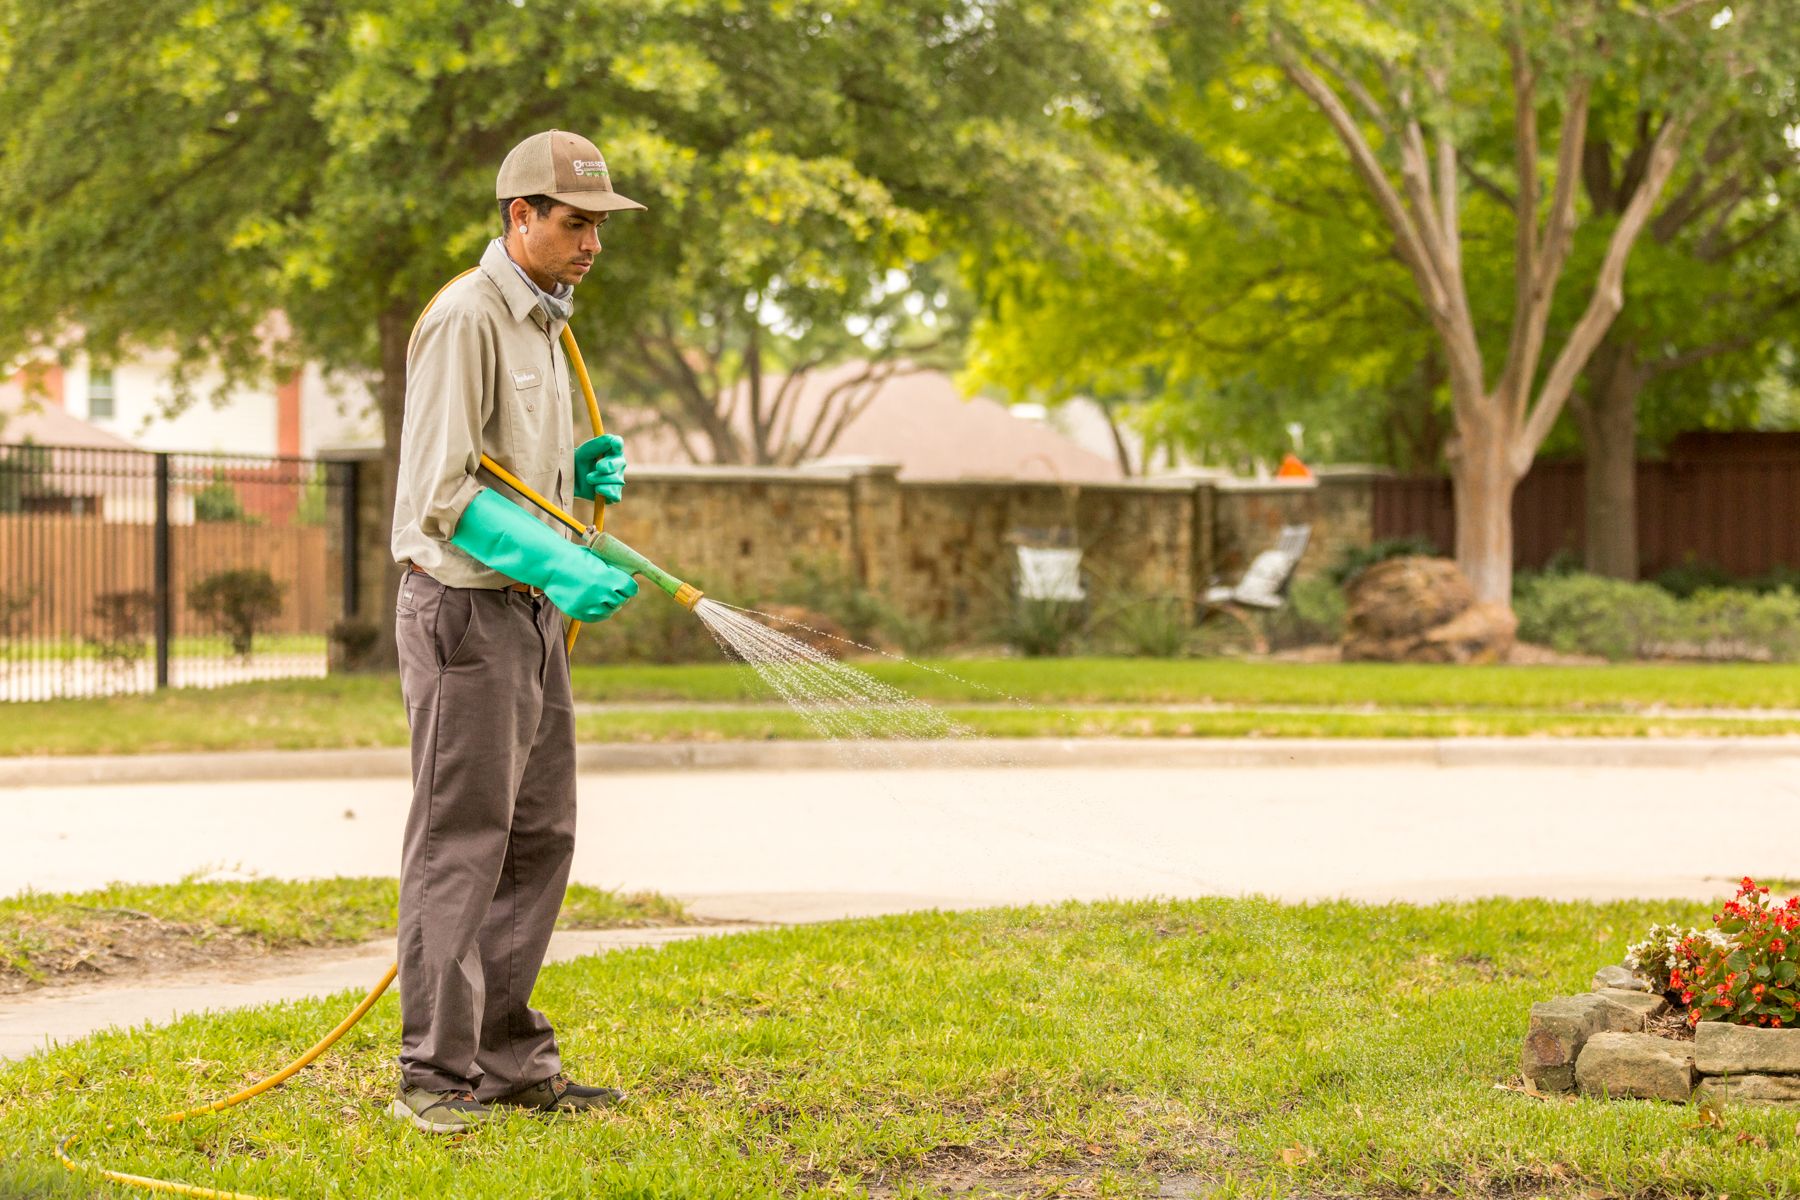 lawn care technician spraying weed control